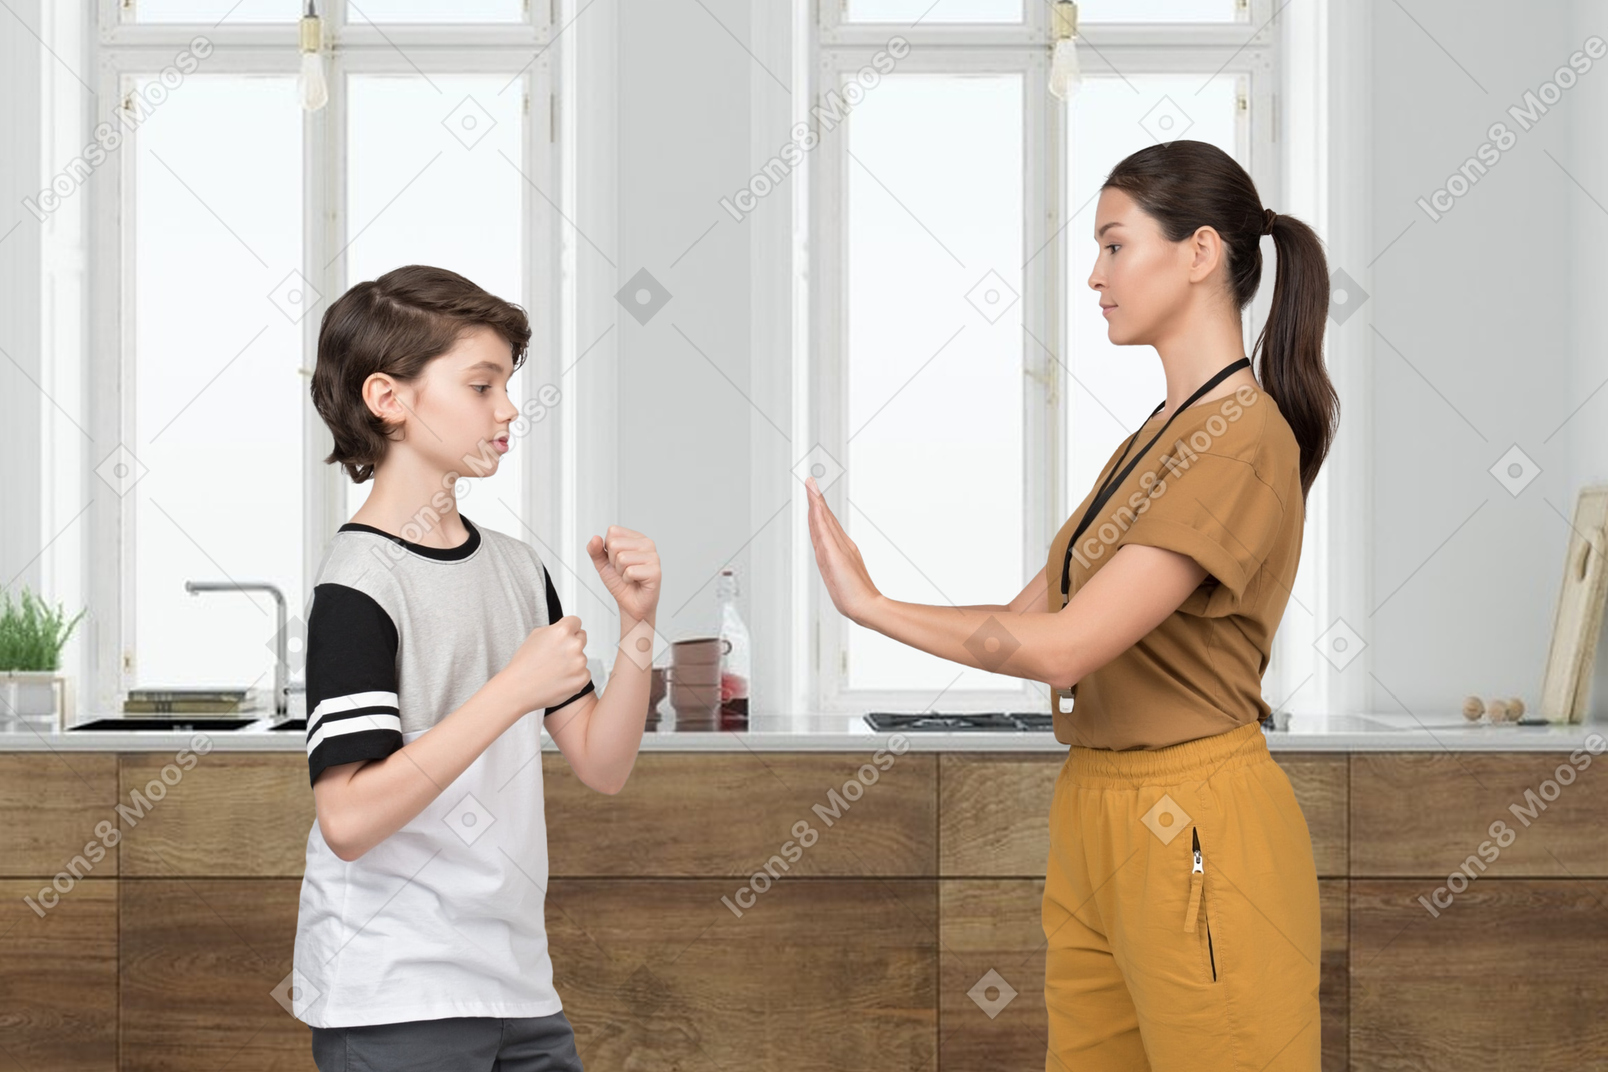 Female coach stopping a boy in a fighting position